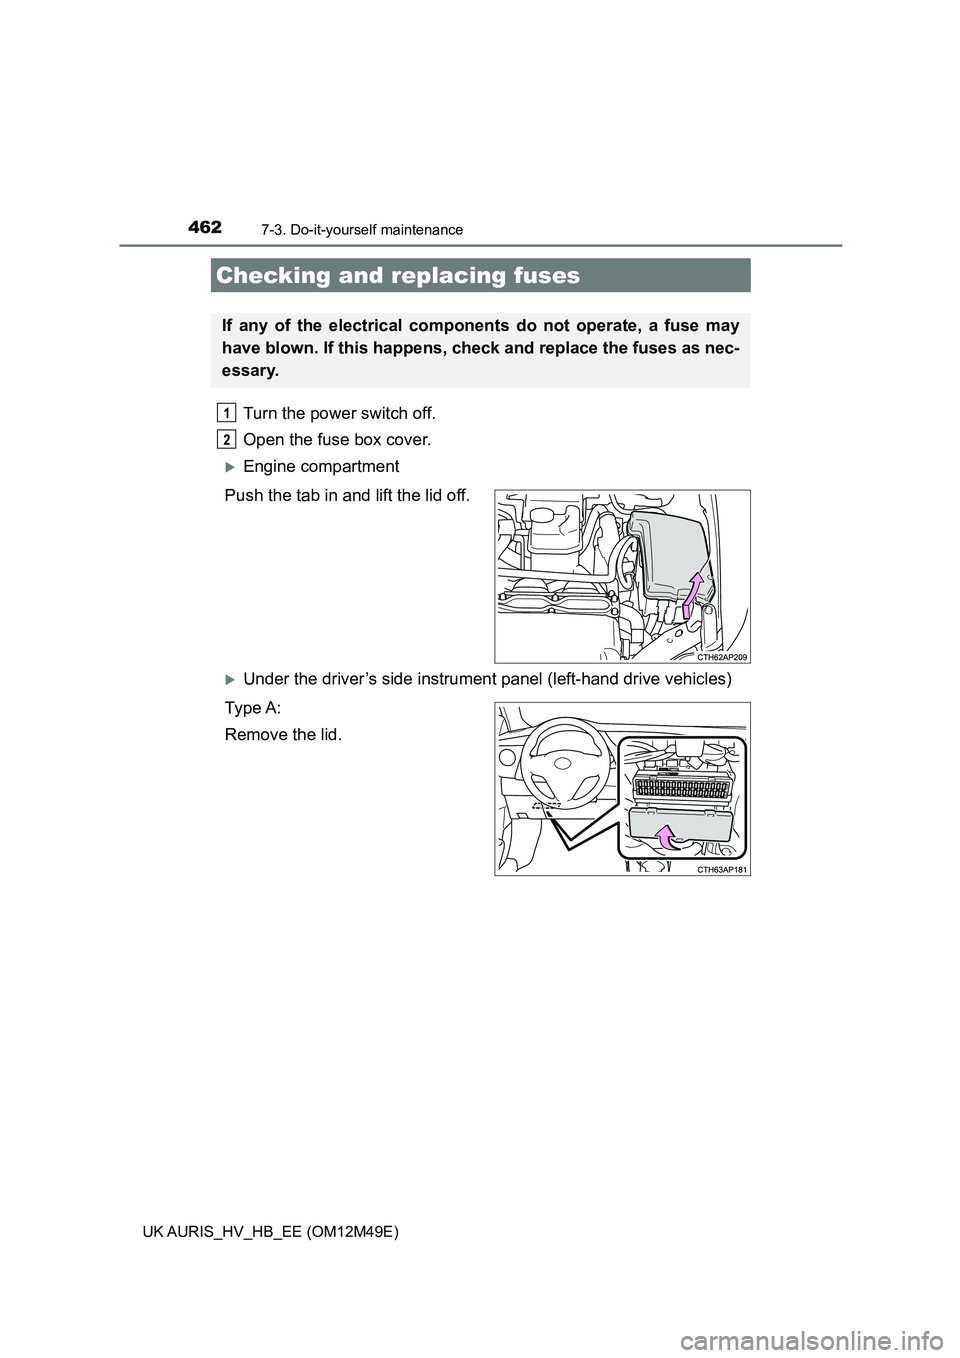 TOYOTA AURIS 2018  Owners Manual (in English) 4627-3. Do-it-yourself maintenance
UK AURIS_HV_HB_EE (OM12M49E)
Turn the power switch off.  
Open the fuse box cover. 
Engine compartment 
Push the tab in and lift the lid off.
Under the driver�